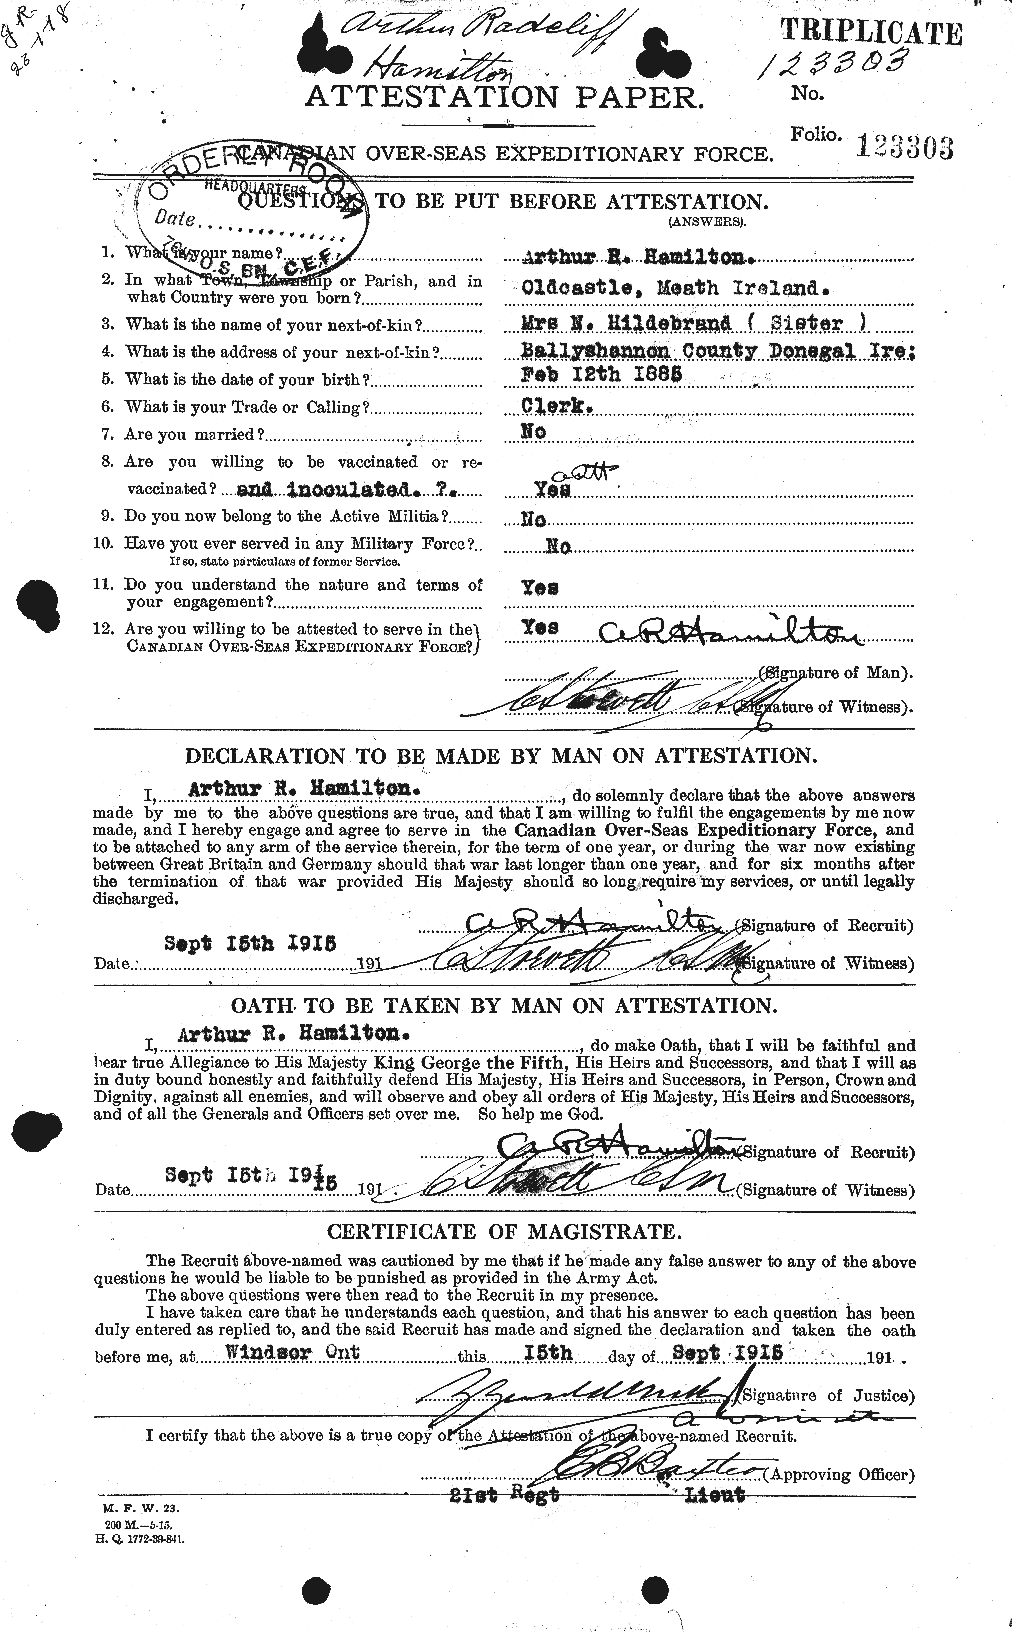 Personnel Records of the First World War - CEF 375252a